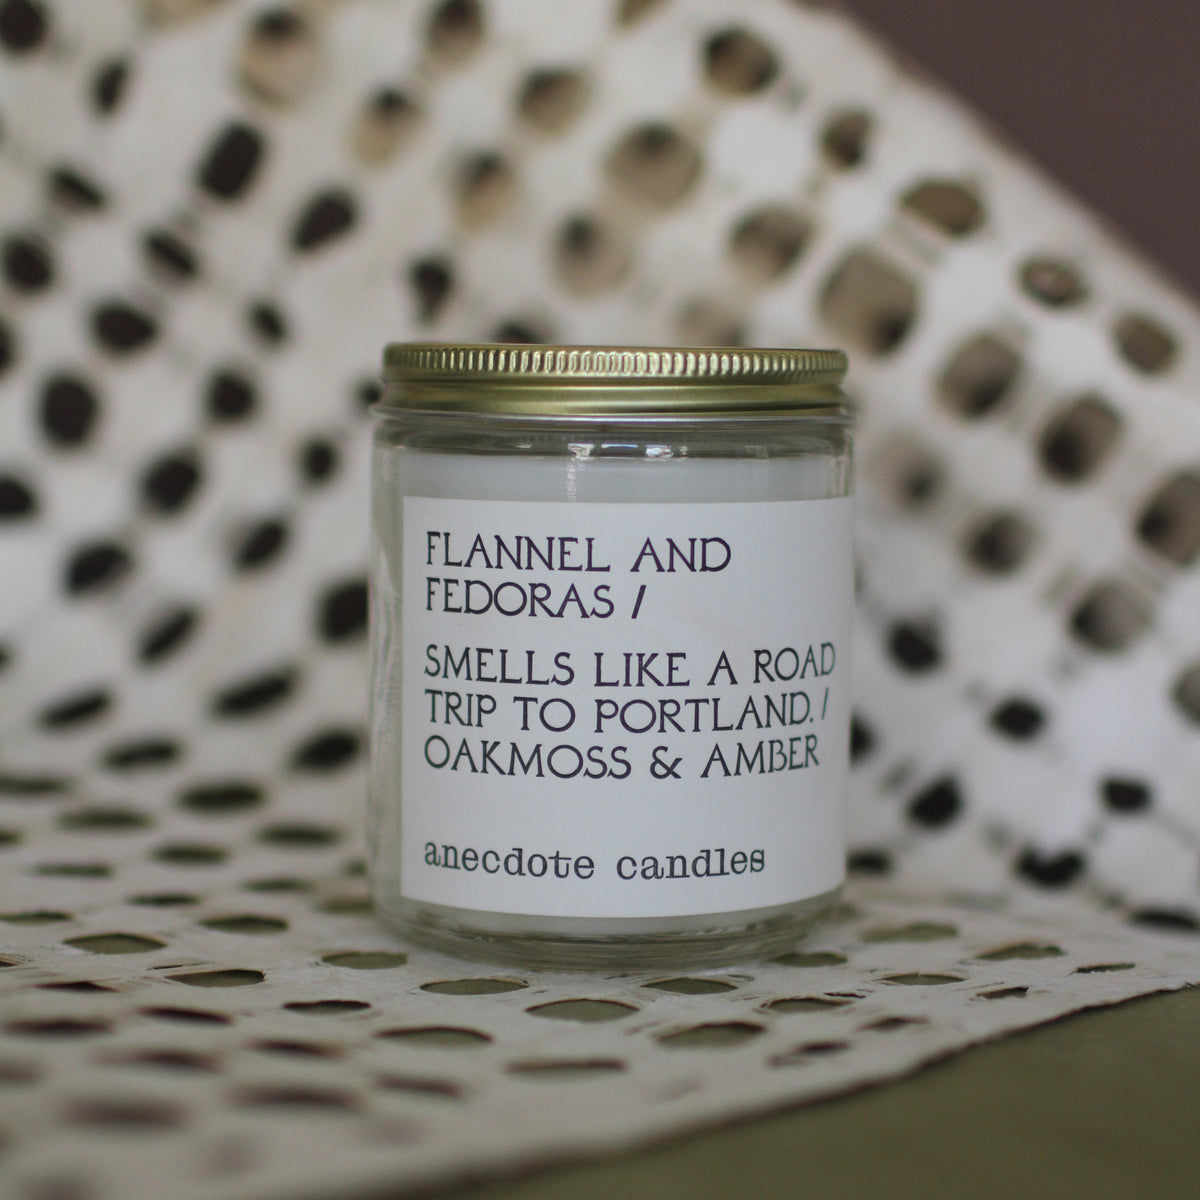 Flannel & Fedoras - Anecdote Candles